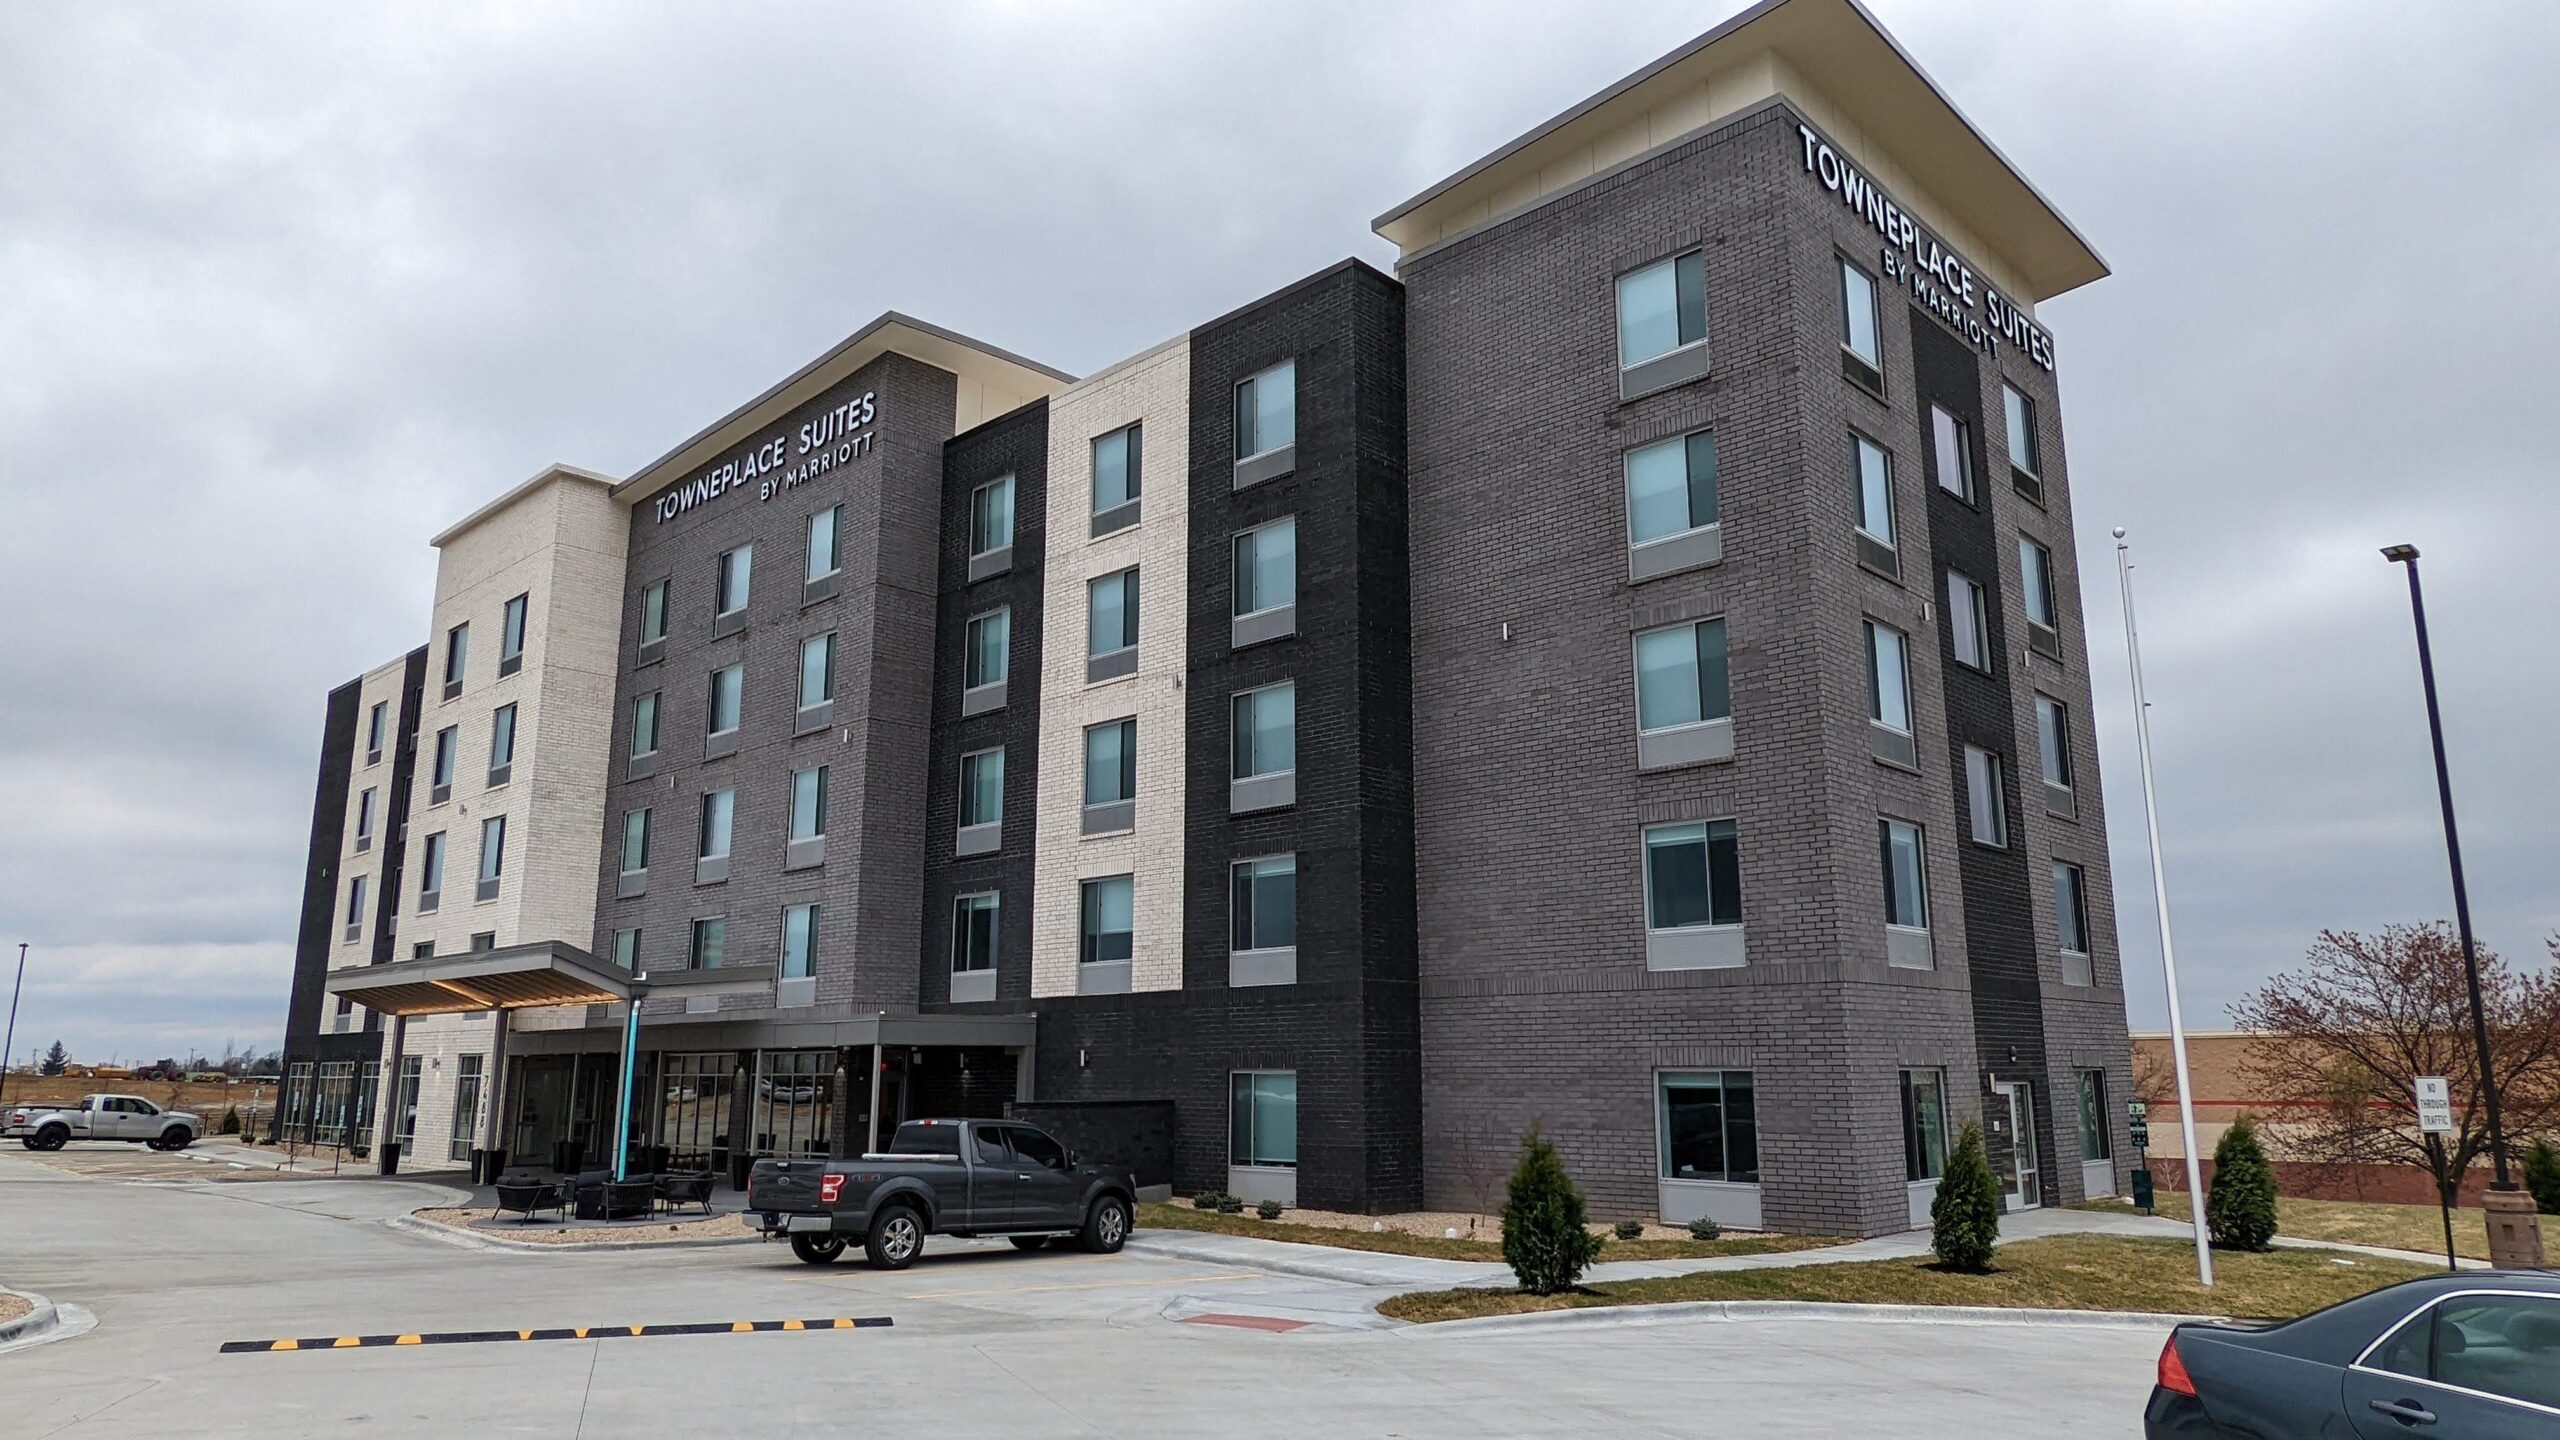 TownePlace Suites Hotel